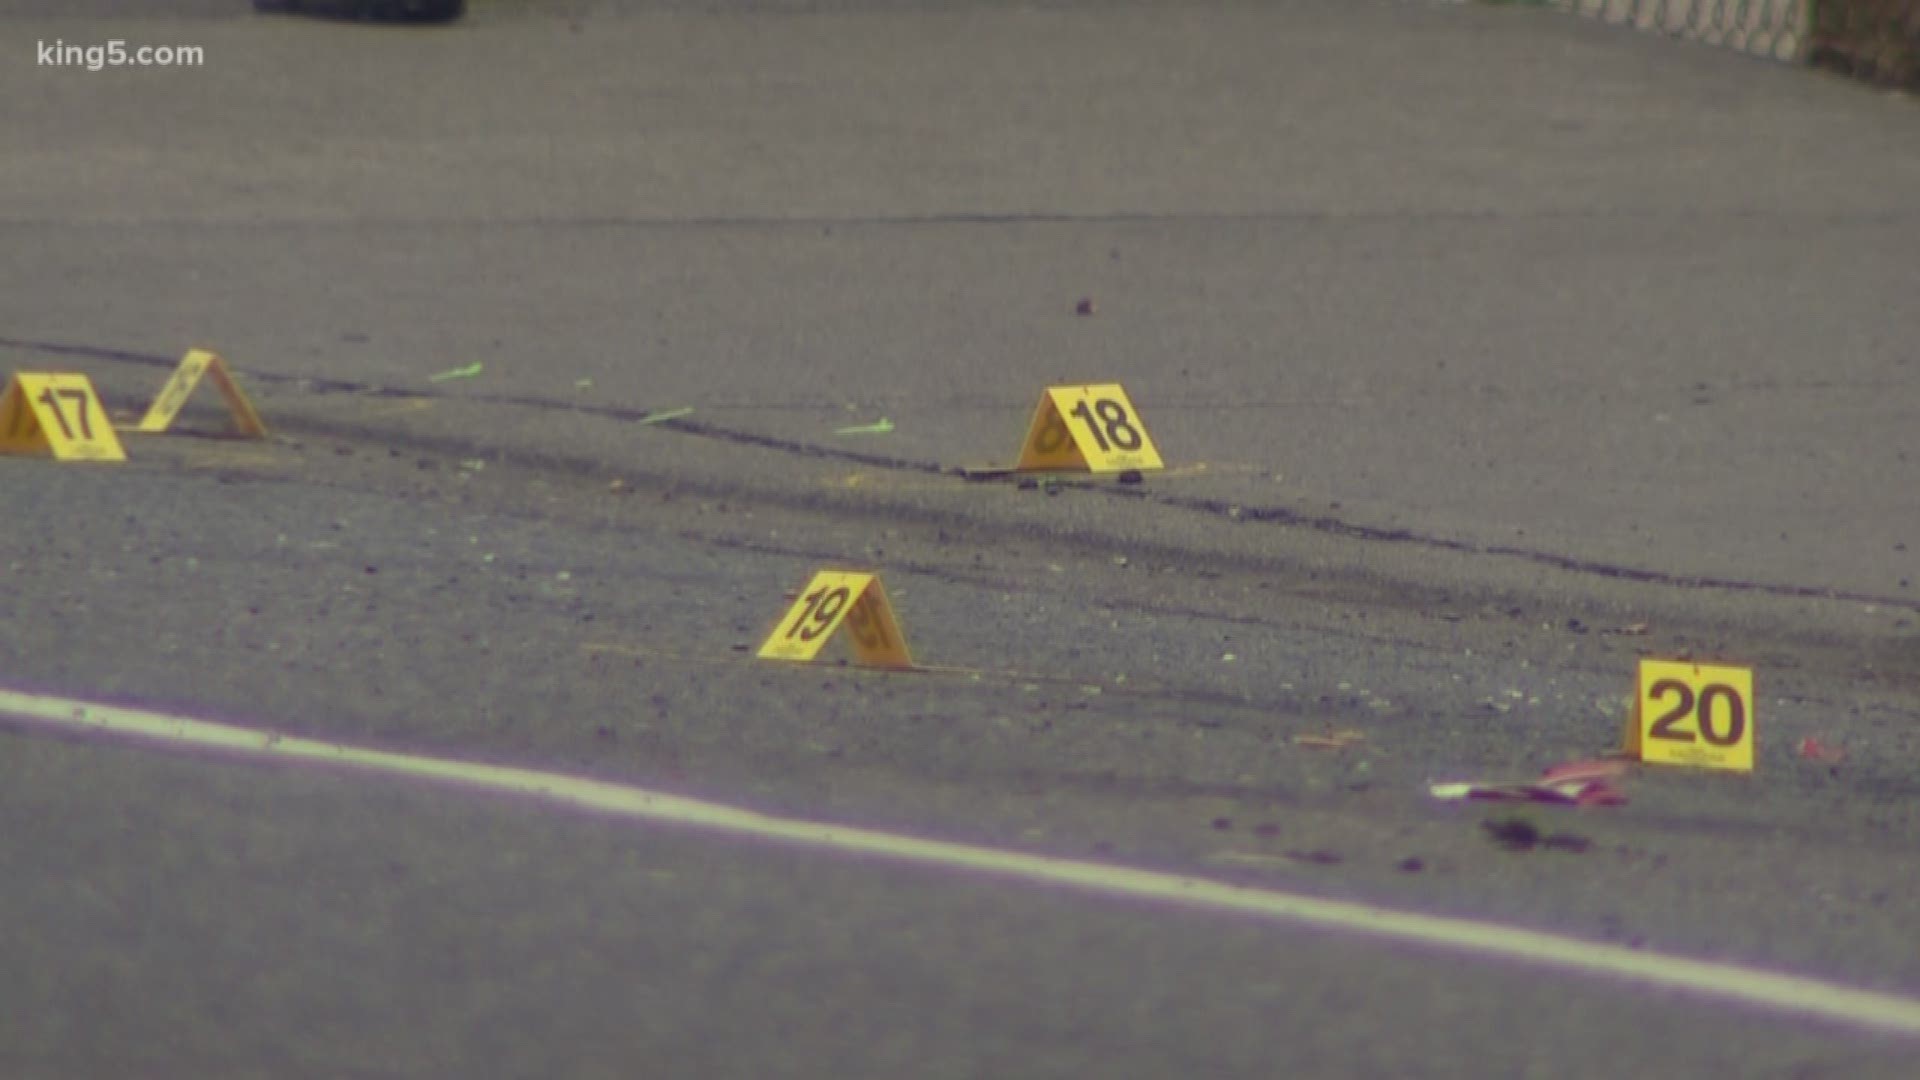 The King County Sheriff's Office is investigating a shooting in White Center that injured at least three people early Sunday. Deputies said dozens of shots were fired, but no one involved called 911.